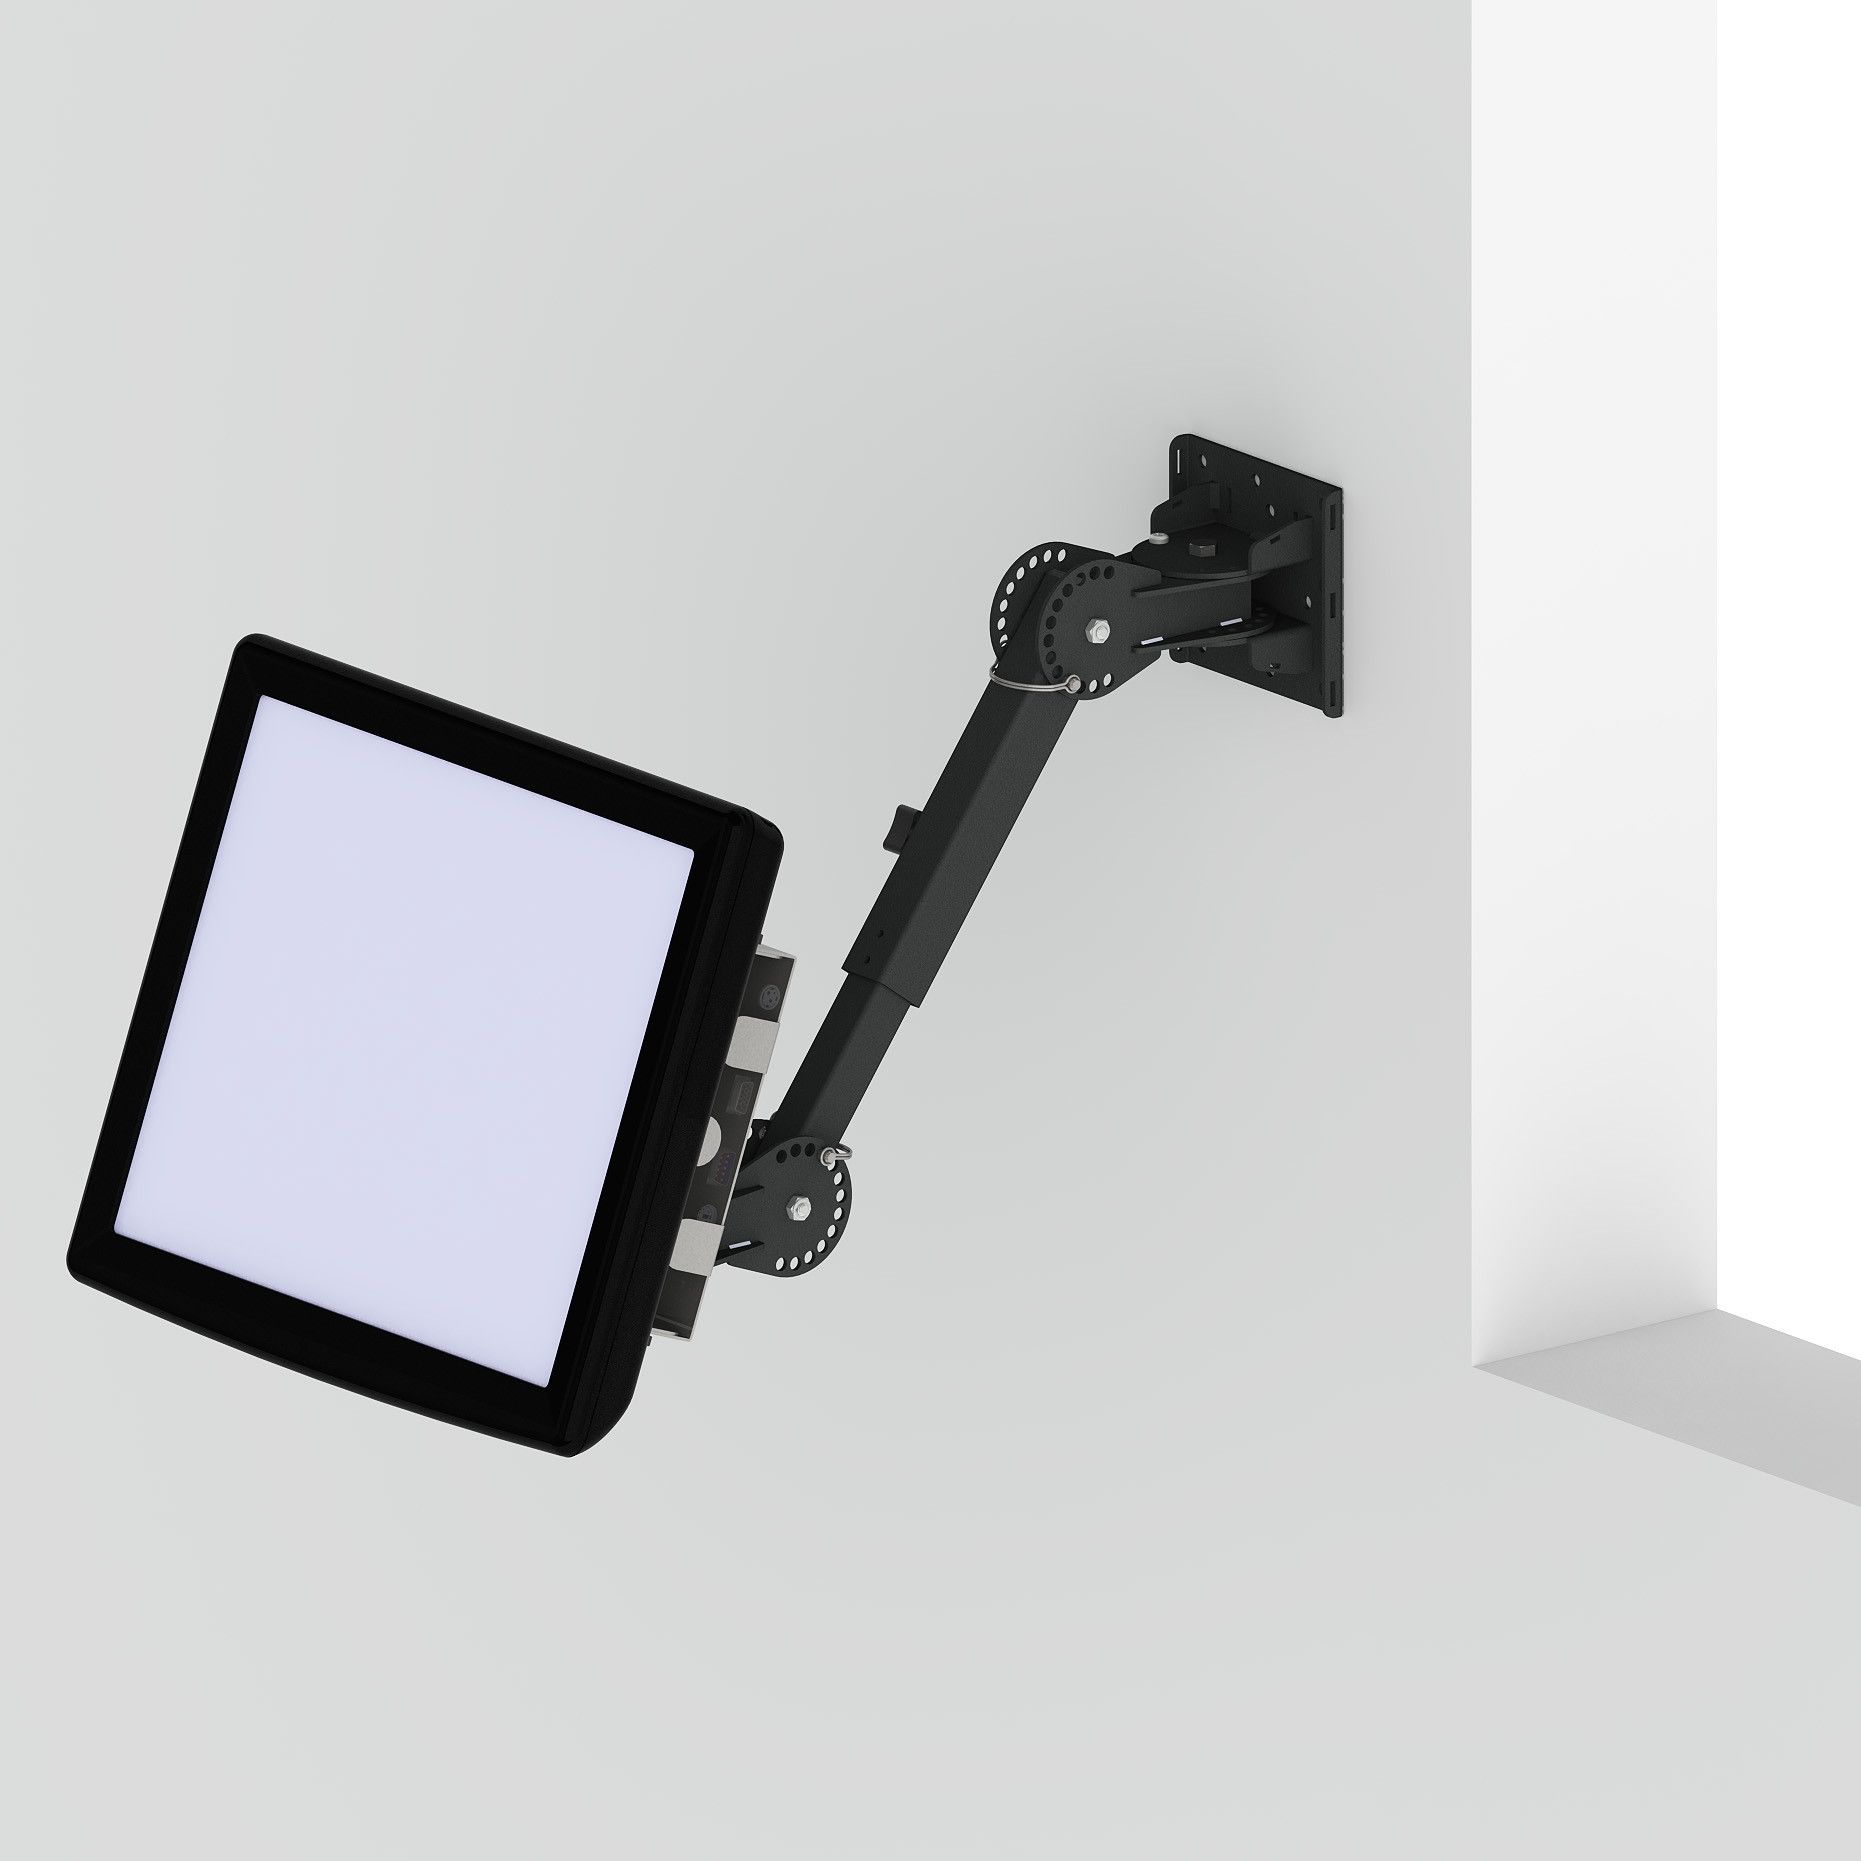 Fully Articulated Wall Mount KDS Support Package for an Elo Touchscreen + MICROS Oracle 166 or 210 Controller